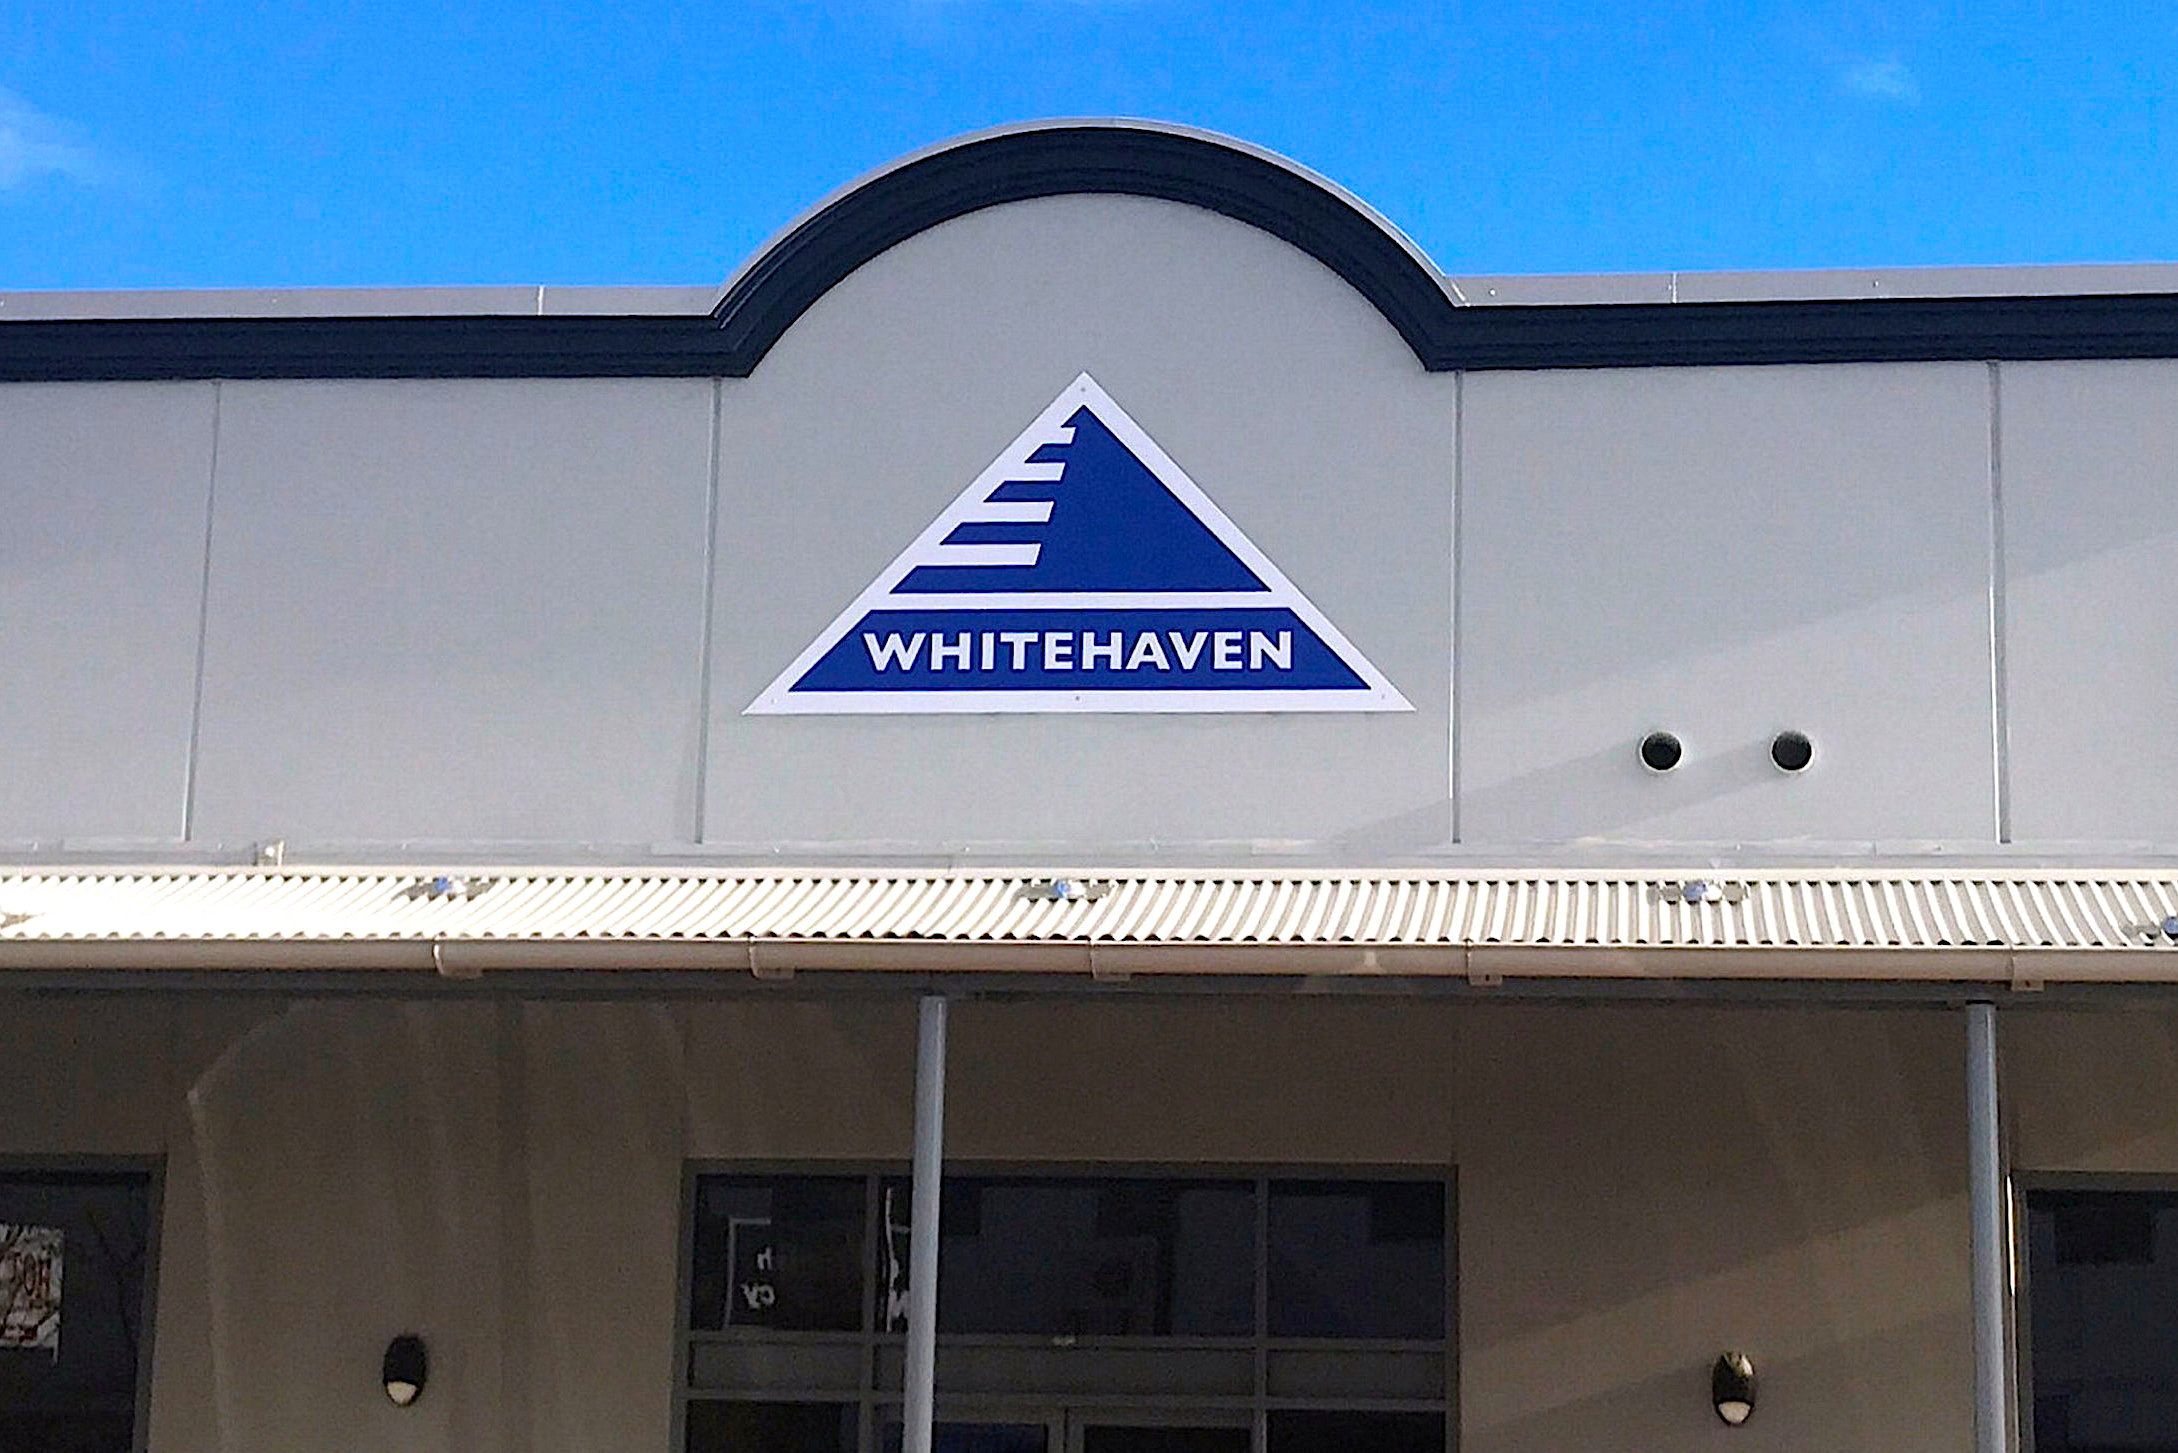 The logo of Australia's biggest independent coal miner Whitehaven Coal Ltd is displayed on their office building located in Gunnedah